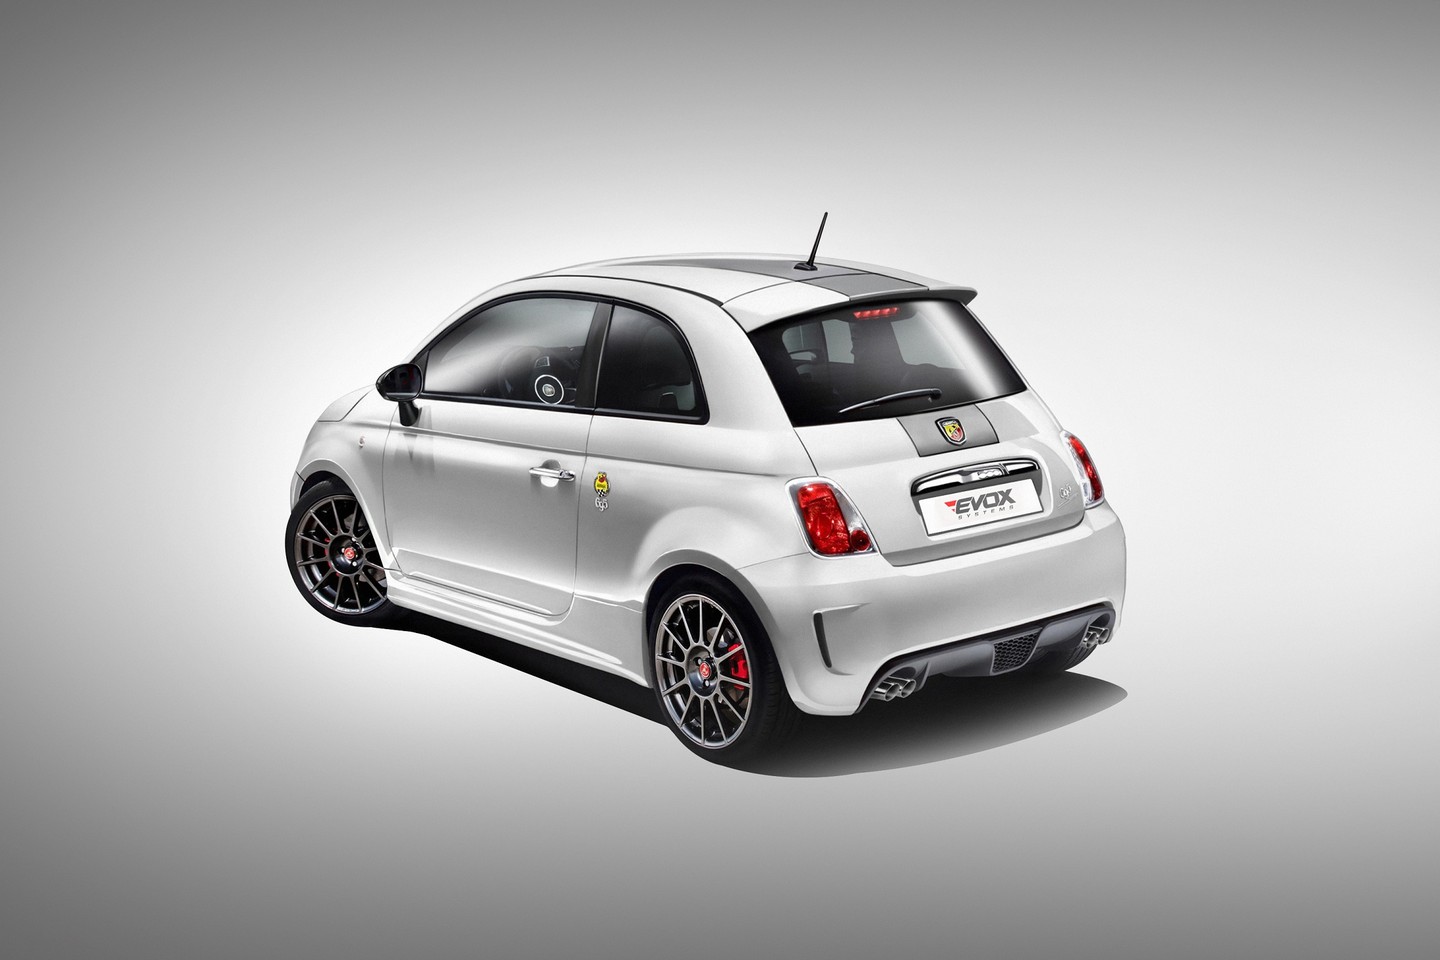 Abarth’s-tuned-models-get-their-own-tuning-courtesy-of-Alpha-N-Performance2